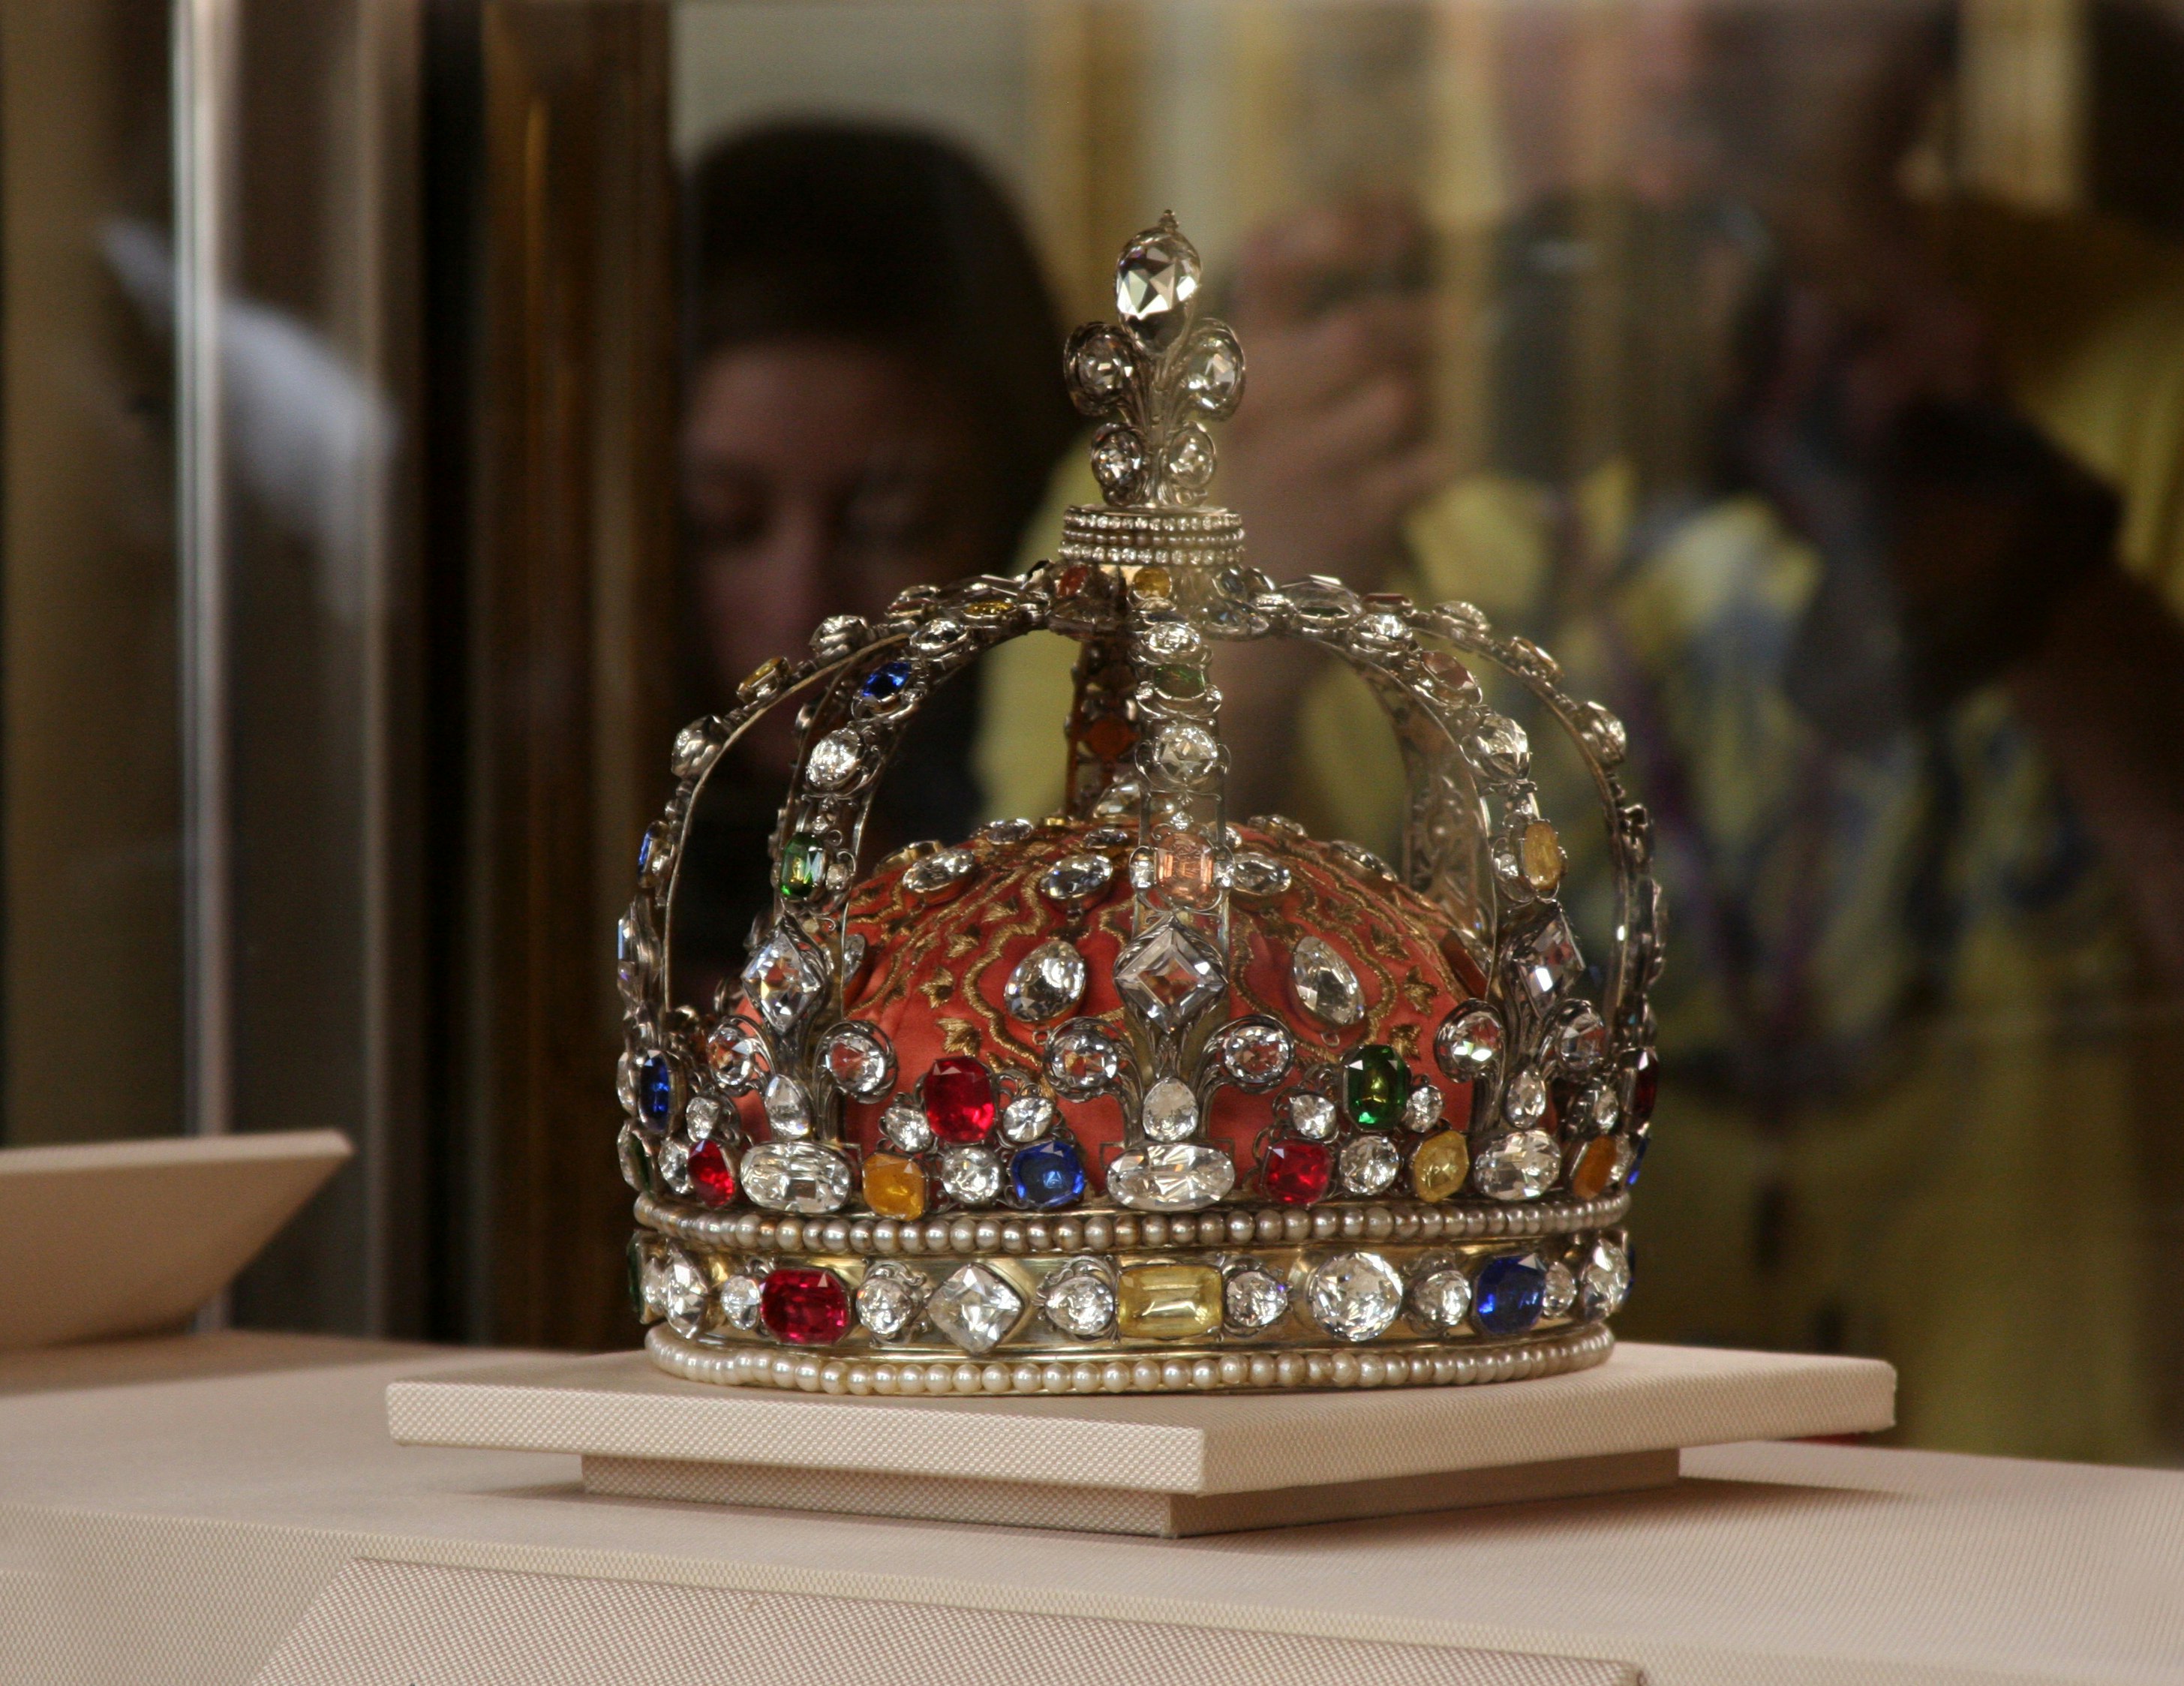 An elaborate crown, encrusted with jewels of different colours, sits on a white display inside a glass case.